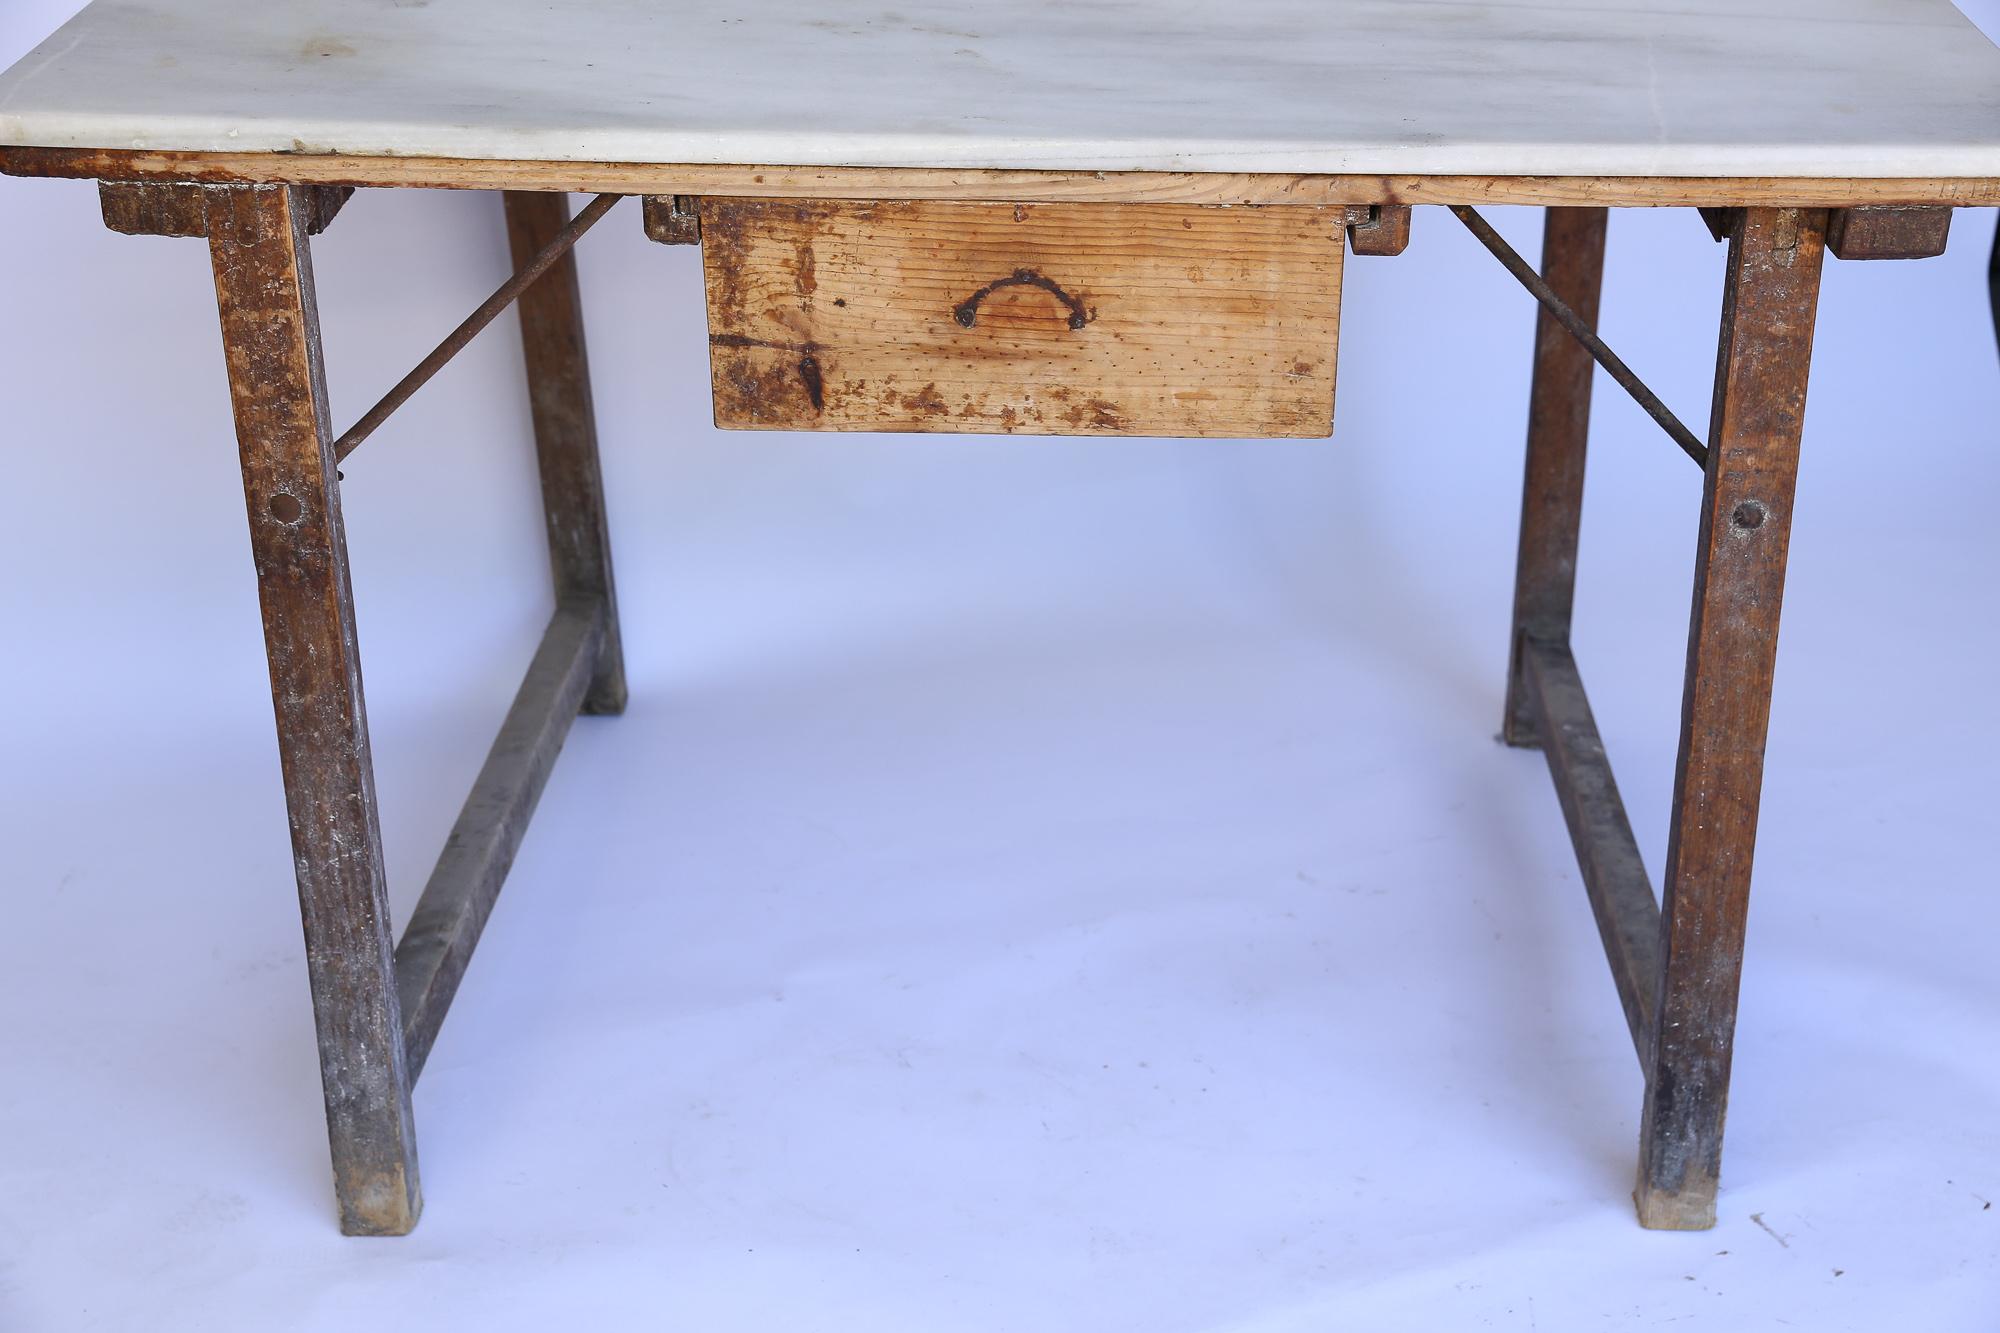 This is a wonderful antique French work table with a marble top and one drawer. The rustic patina and sturdy construction make the piece a great option as a kitchen island. The drawer measurements are as follows: 15.25